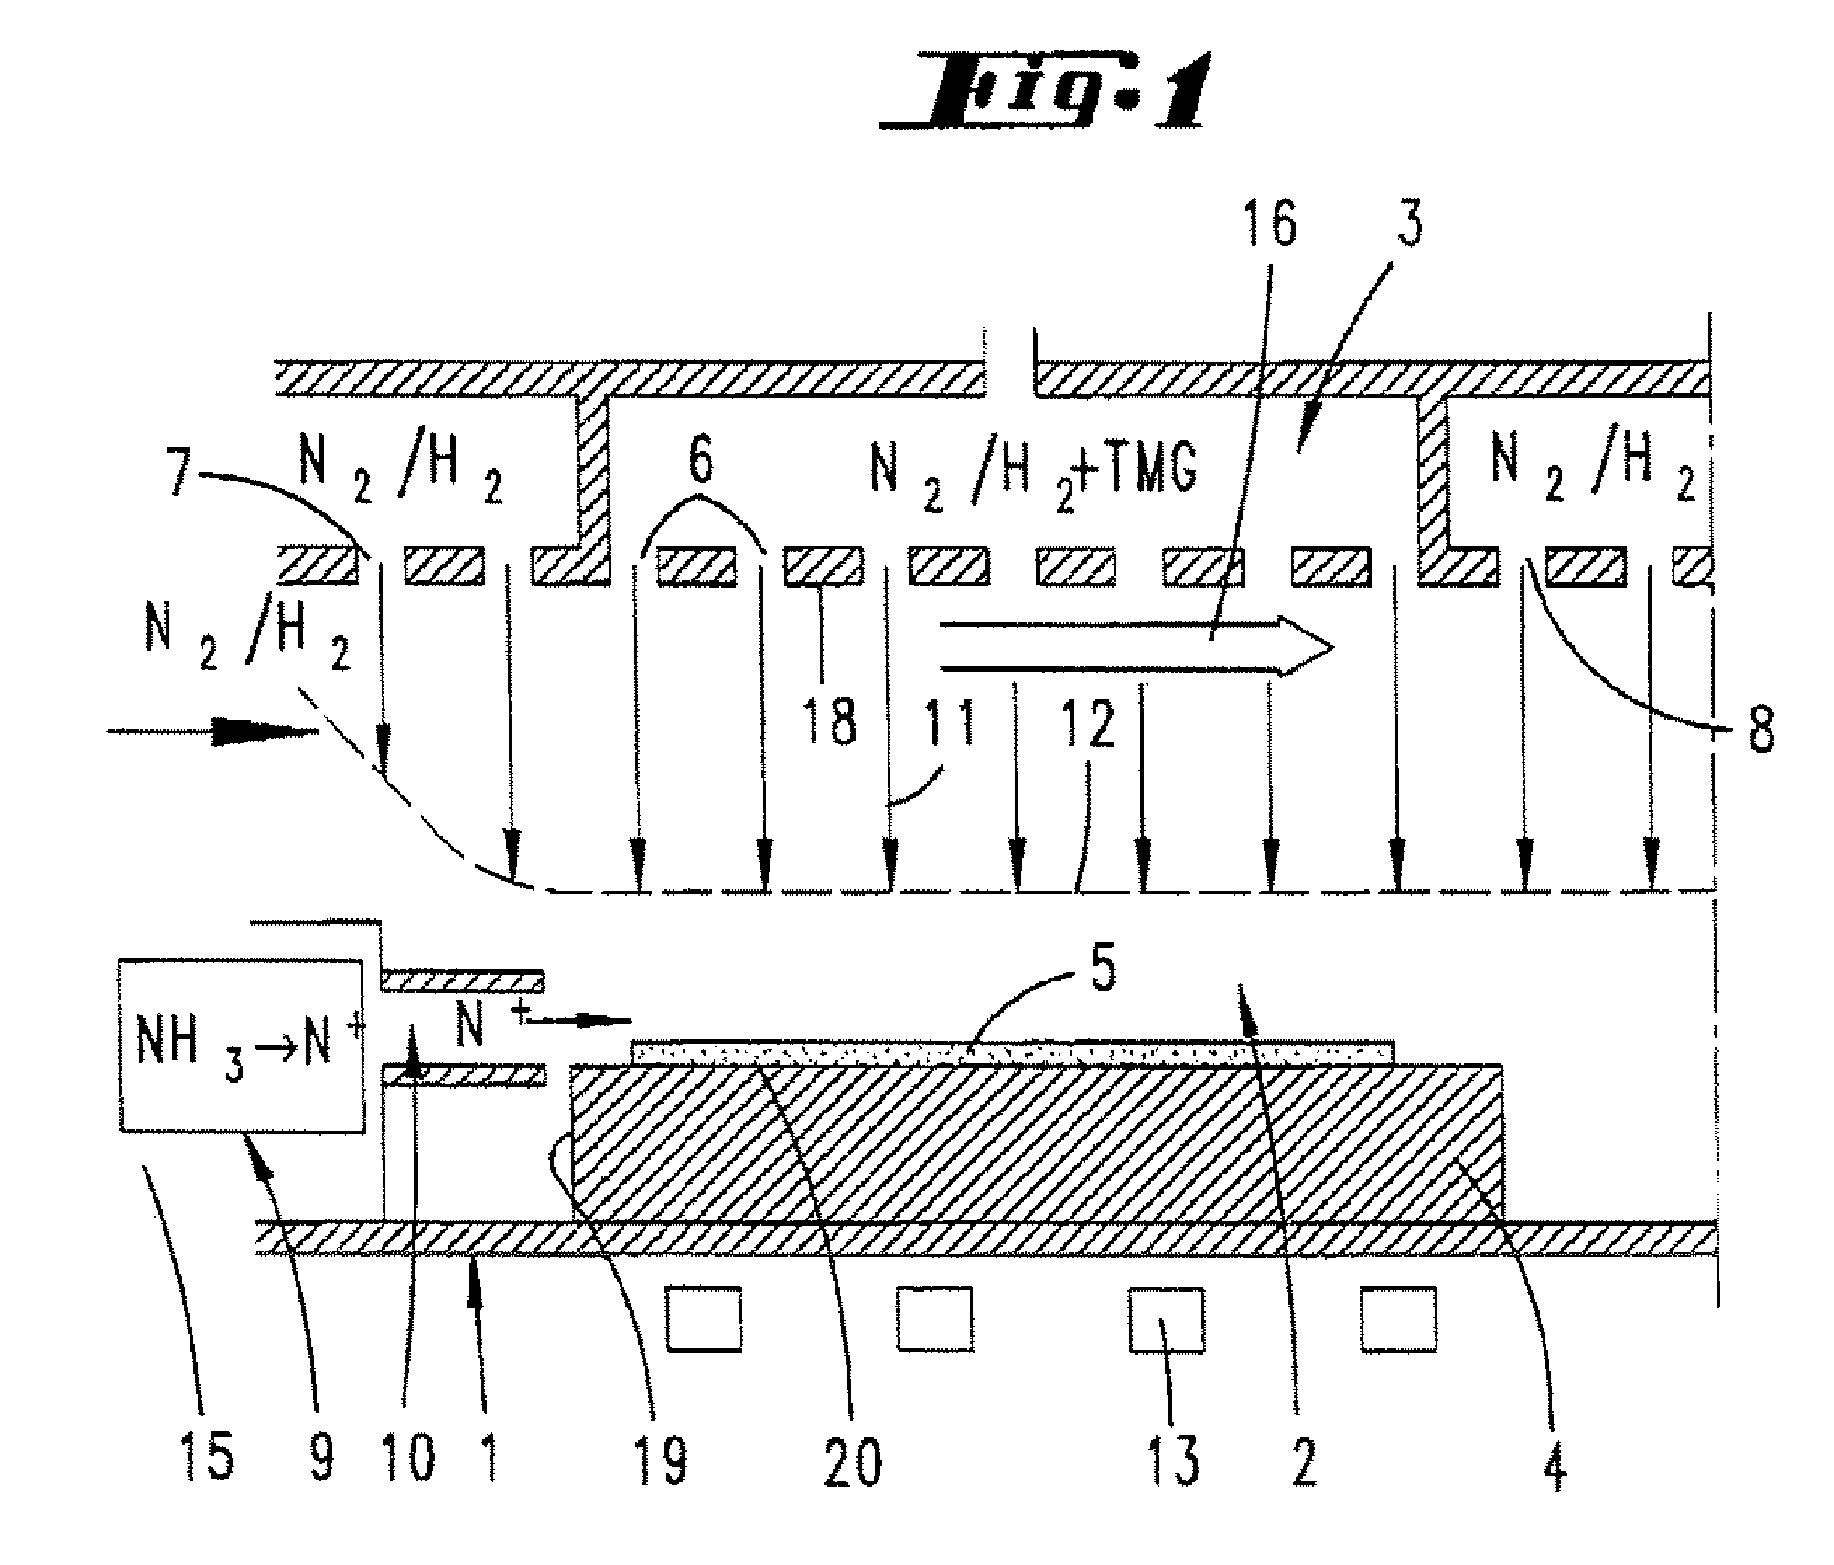 Process And Apparatus For Depositing Semiconductor Layers Using Two Process Gases, One Of Which is Preconditioned